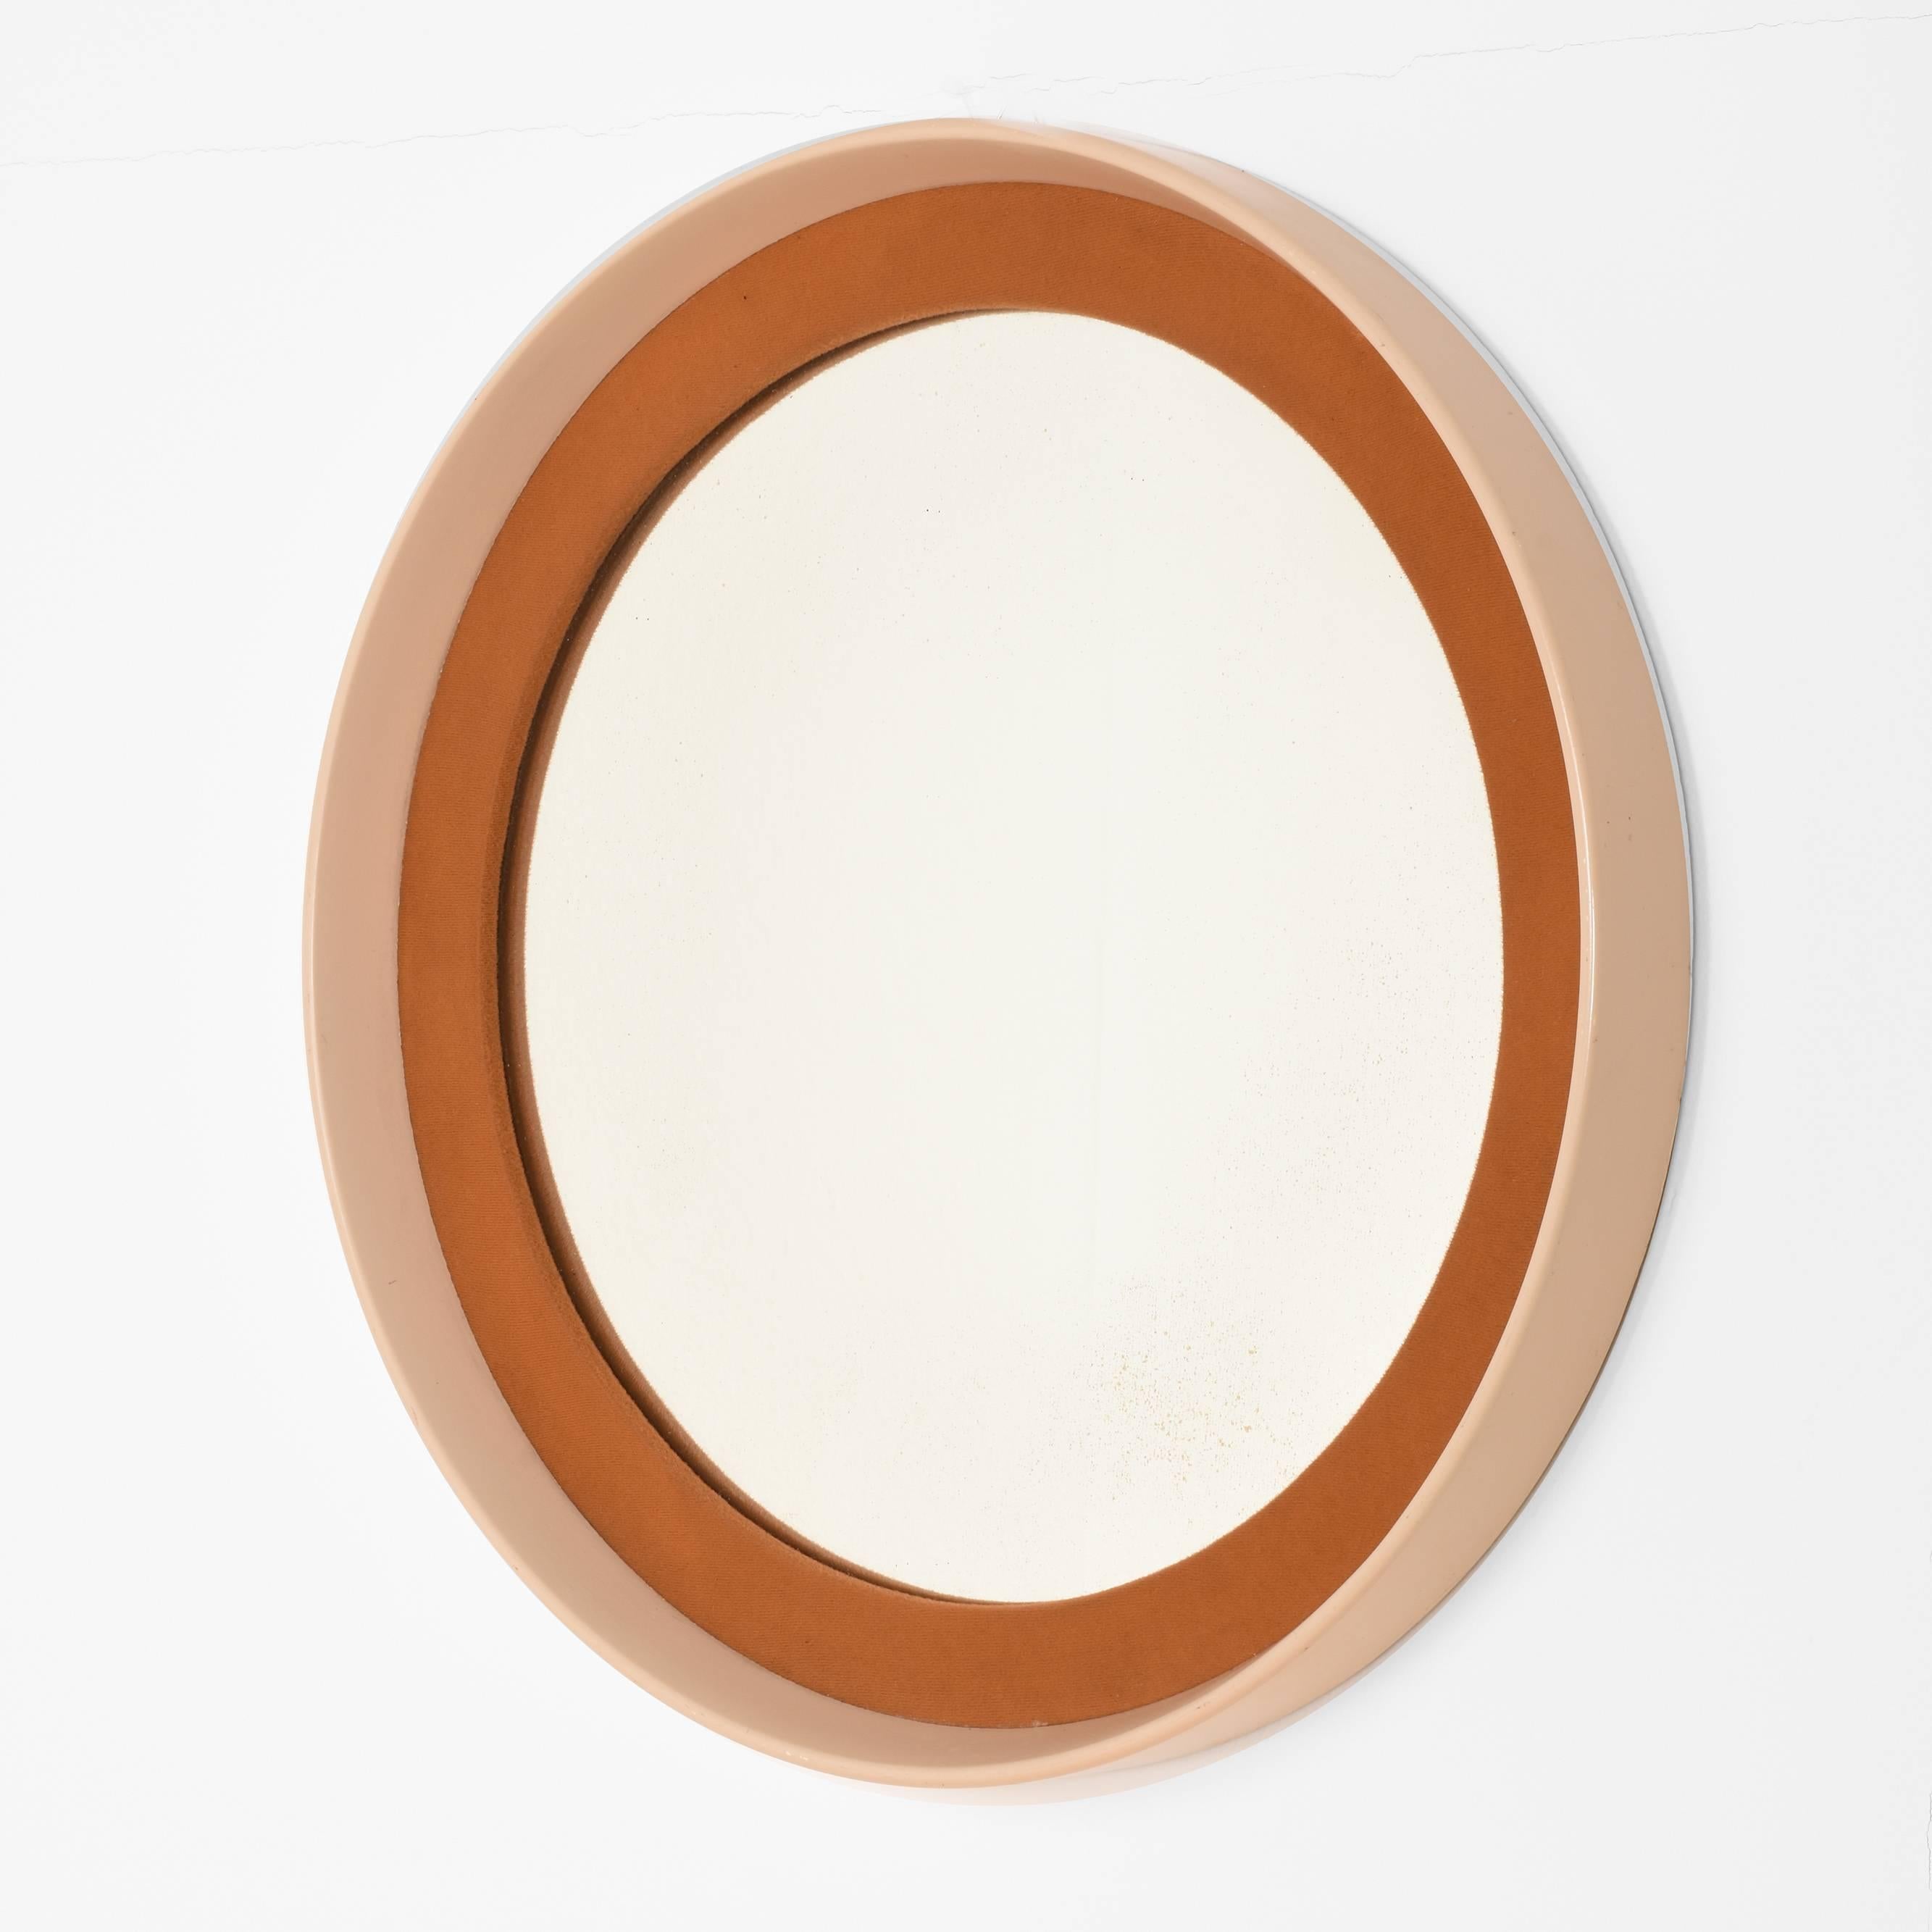 Italian Round Mirror with Frame in Lacquered Wood and Fabric, Italy, 1970s Midcentury For Sale